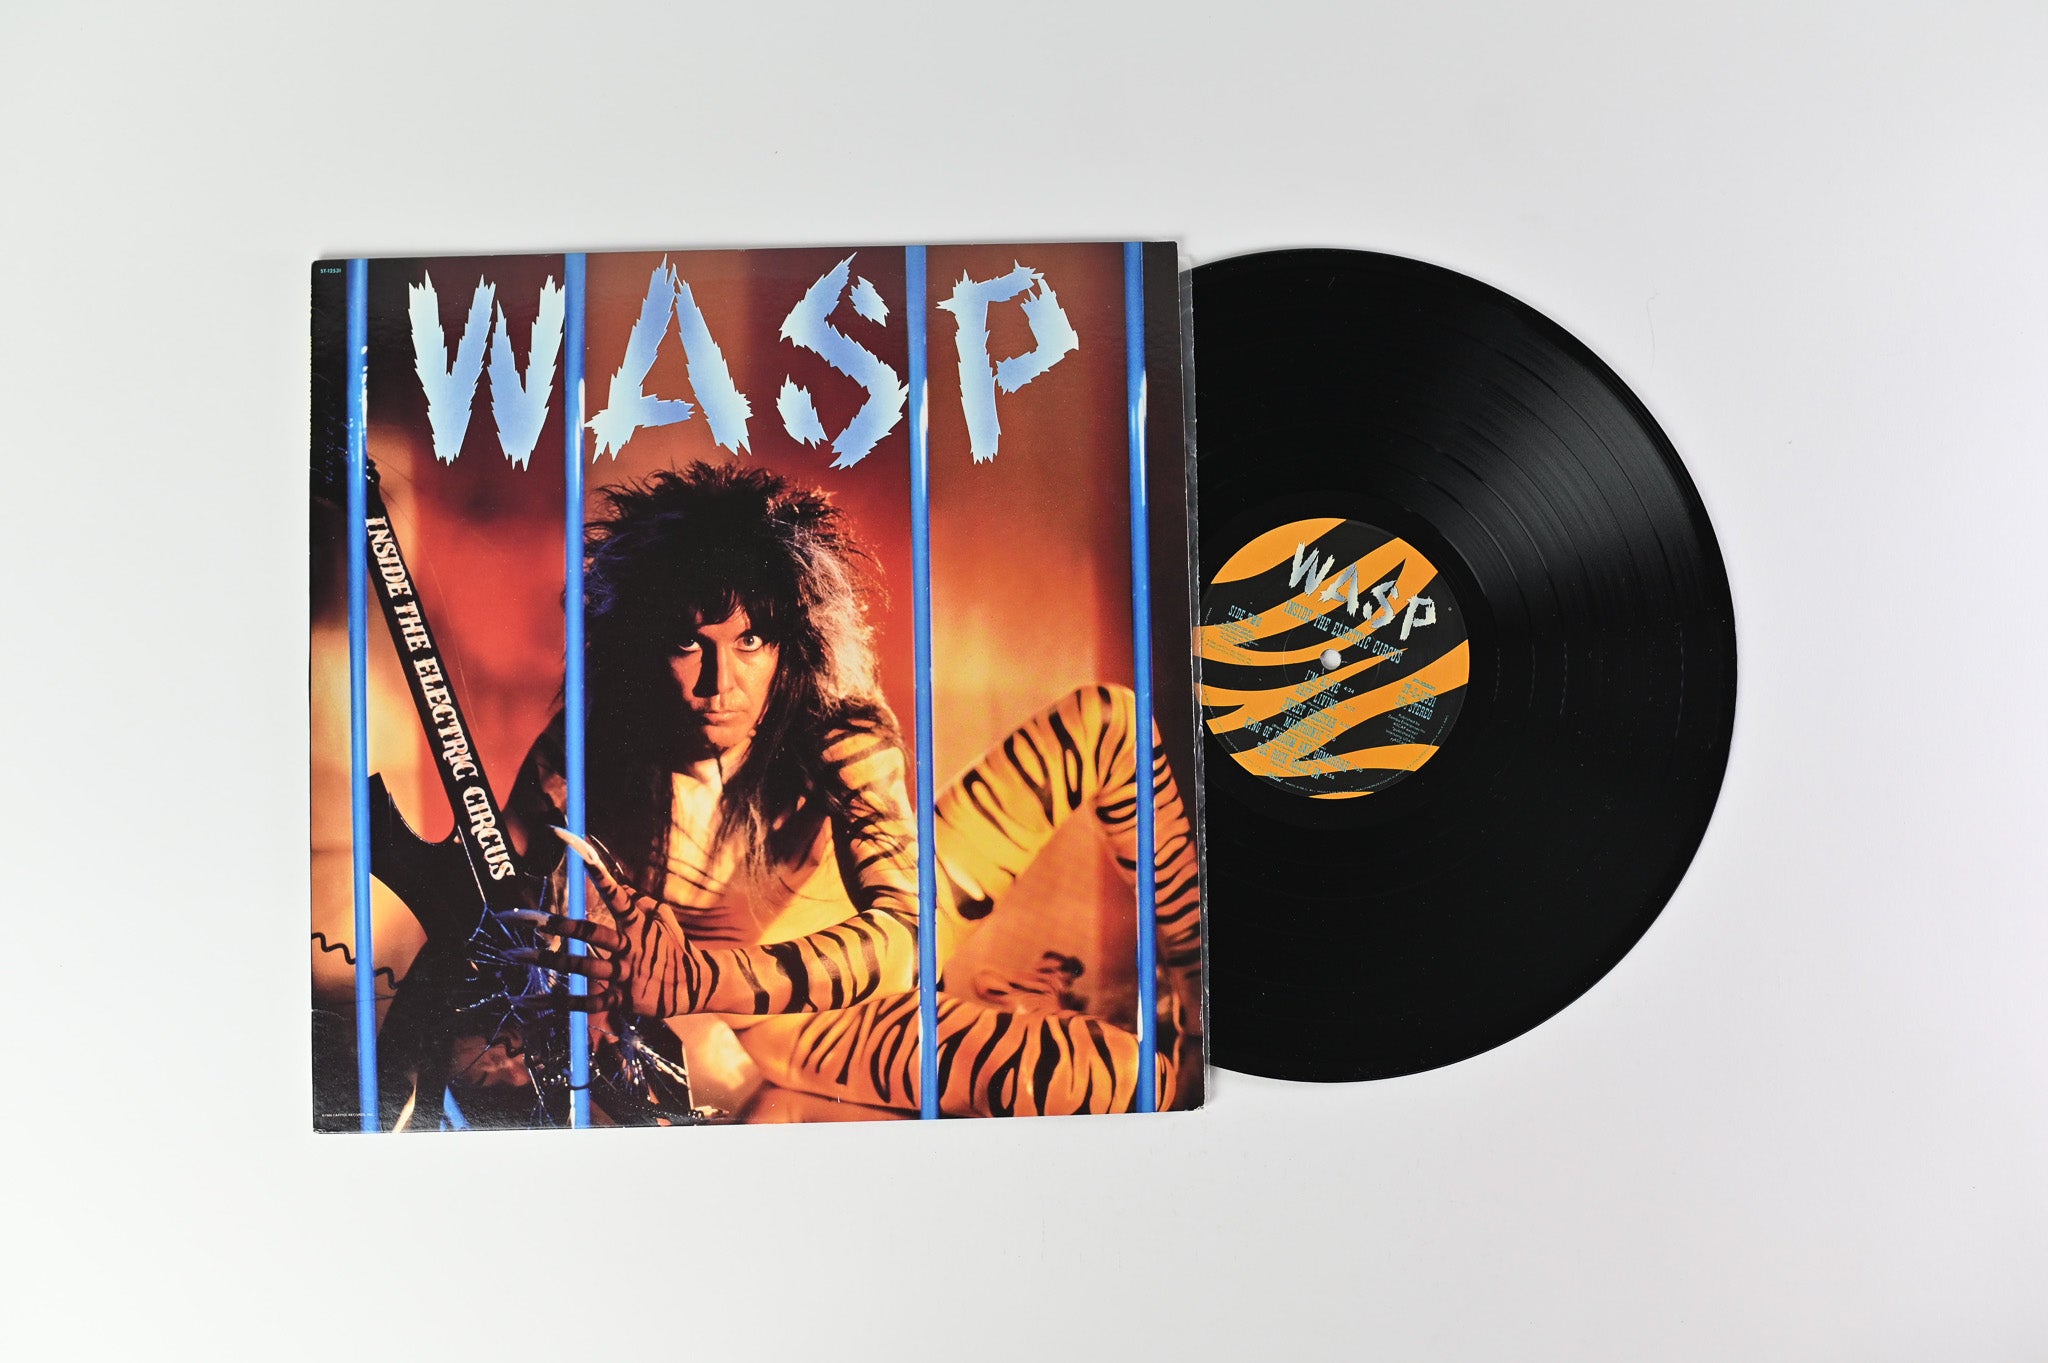 W.A.S.P. - Inside The Electric Circus on Capitol